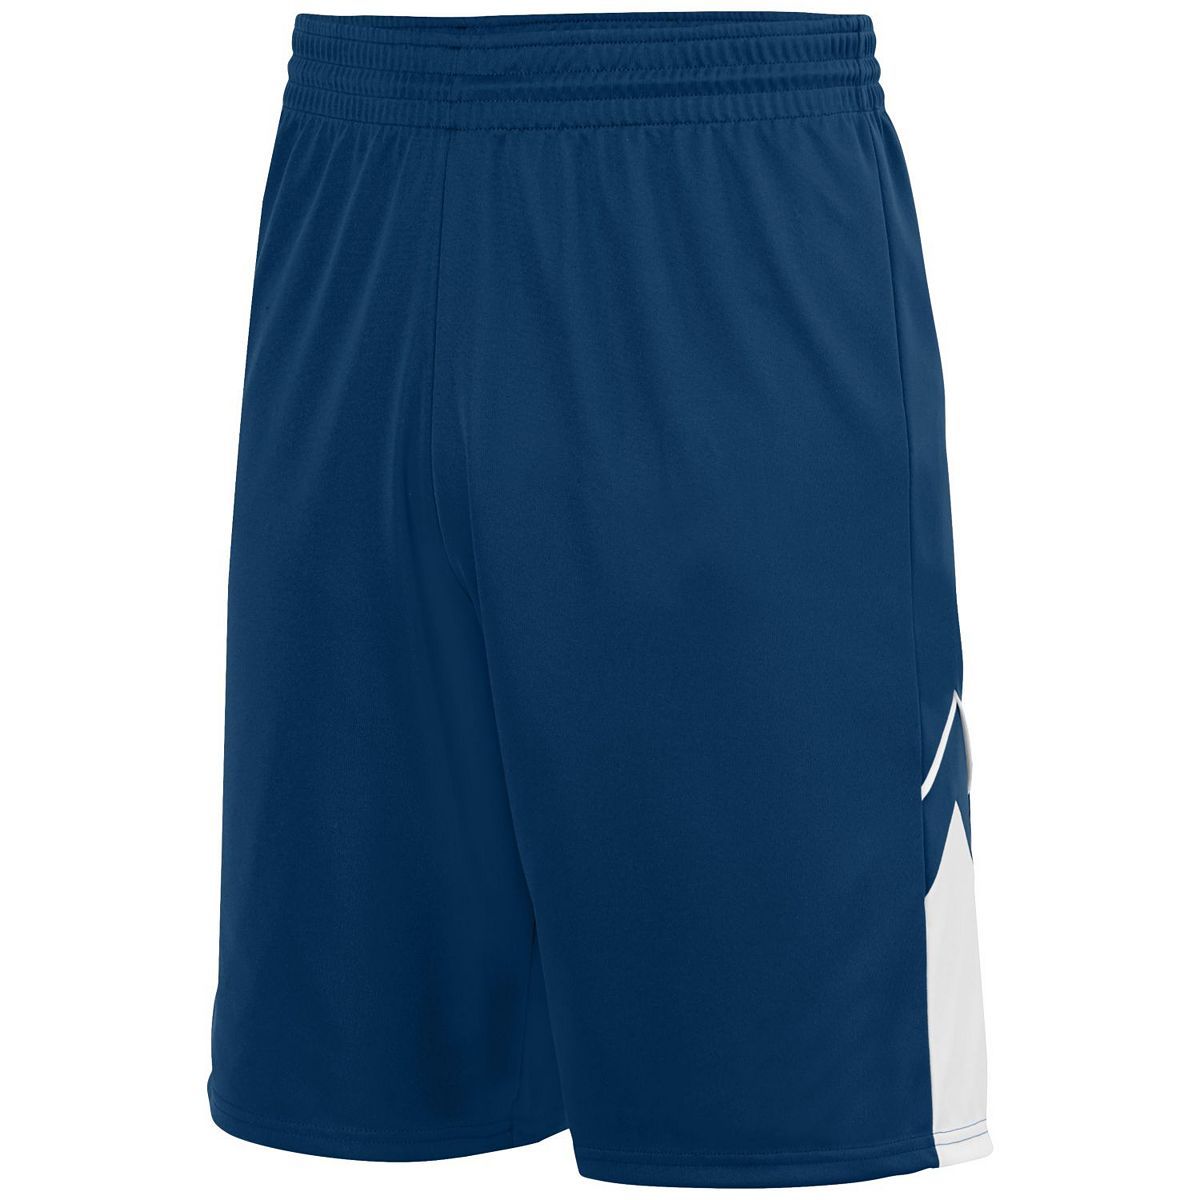 Augusta Sportswear Youth Alley-Oop Reversible Shorts in Navy/White  -Part of the Youth, Youth-Shorts, Augusta-Products, Basketball, All-Sports, All-Sports-1 product lines at KanaleyCreations.com